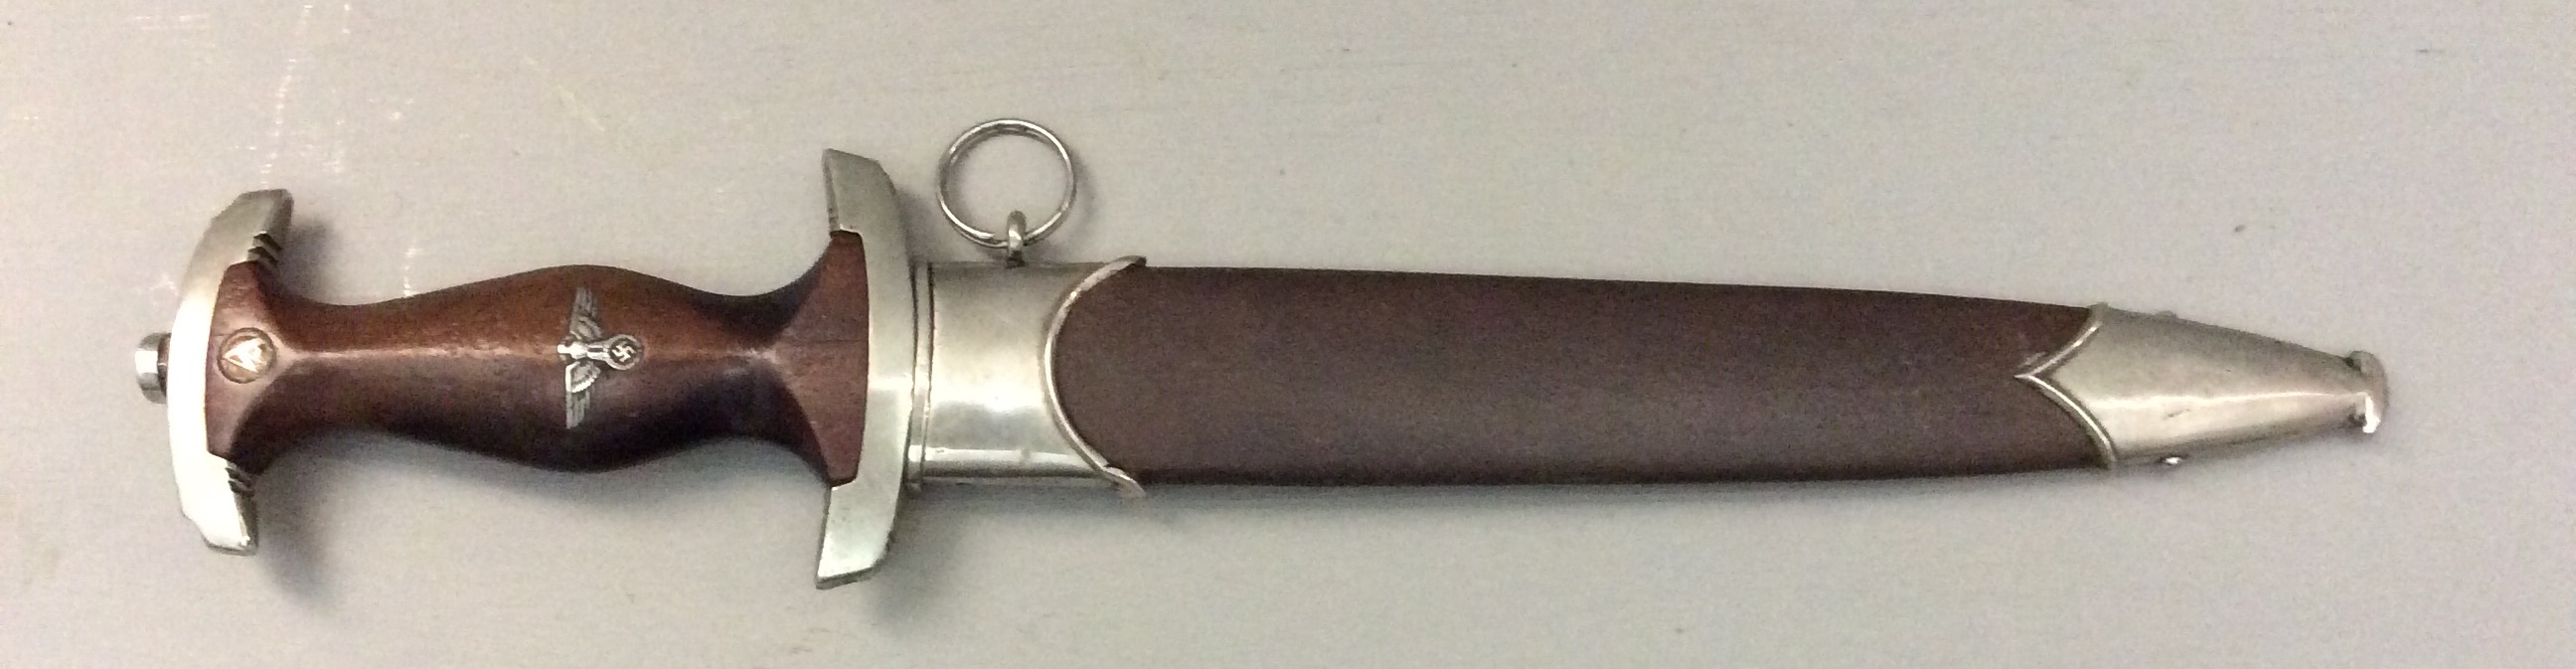 A WORLD WAR II GERMAN SA DAGGER Brown wooden grip with solid nickel fittings and brown leather